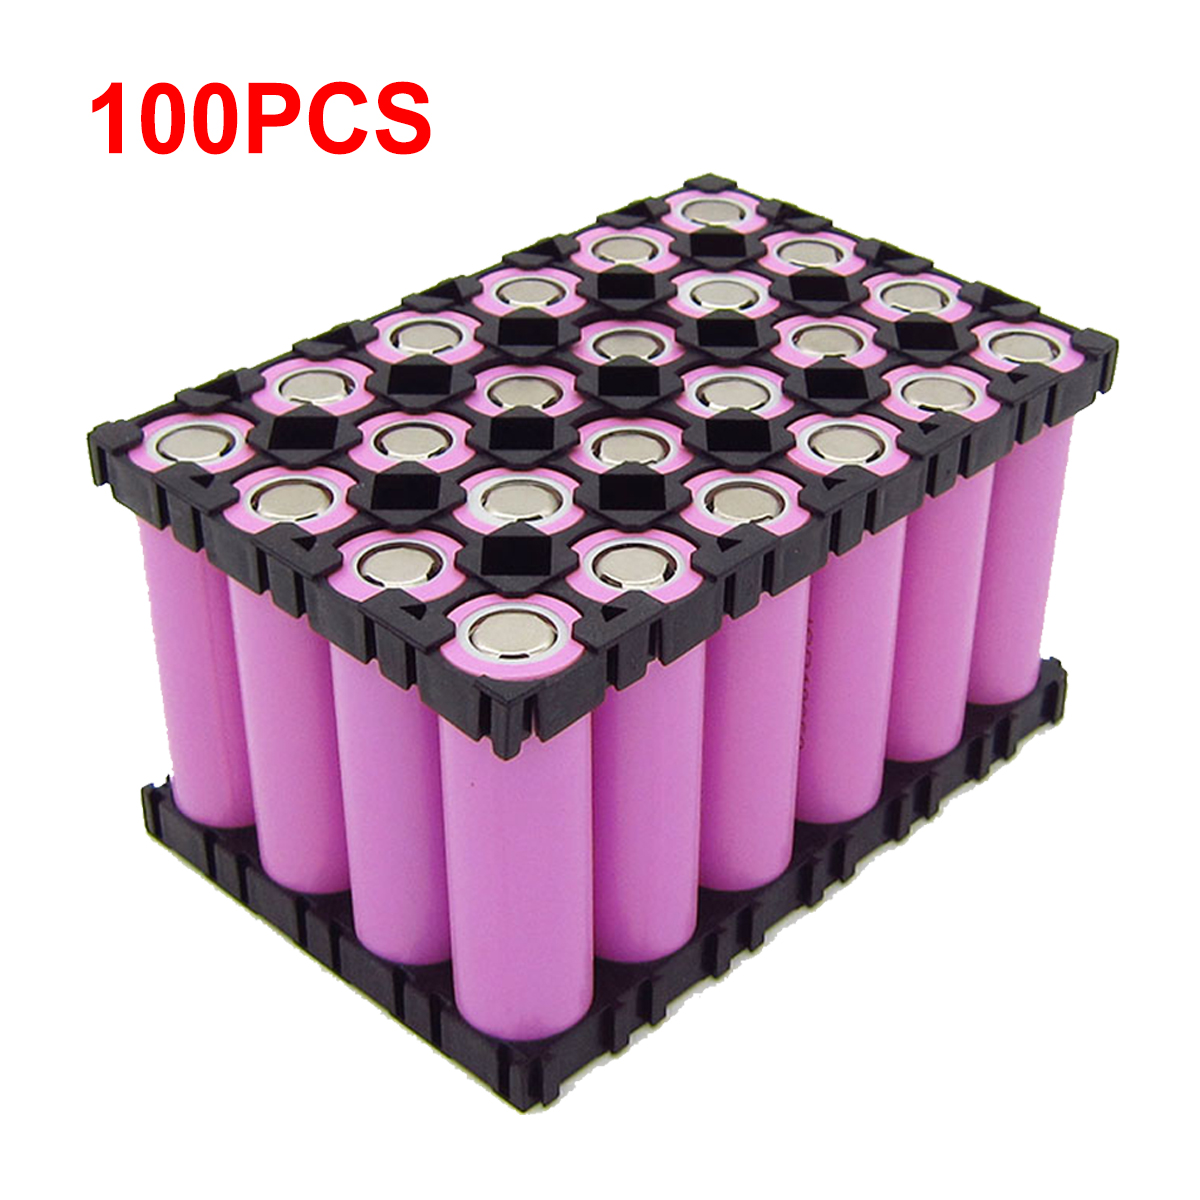 100Pcs-Single-18650-Lithium-Battery-Bracket-Fixed-Composite-Bracket-Battery-Group-Support-For-Electr-1686922-2